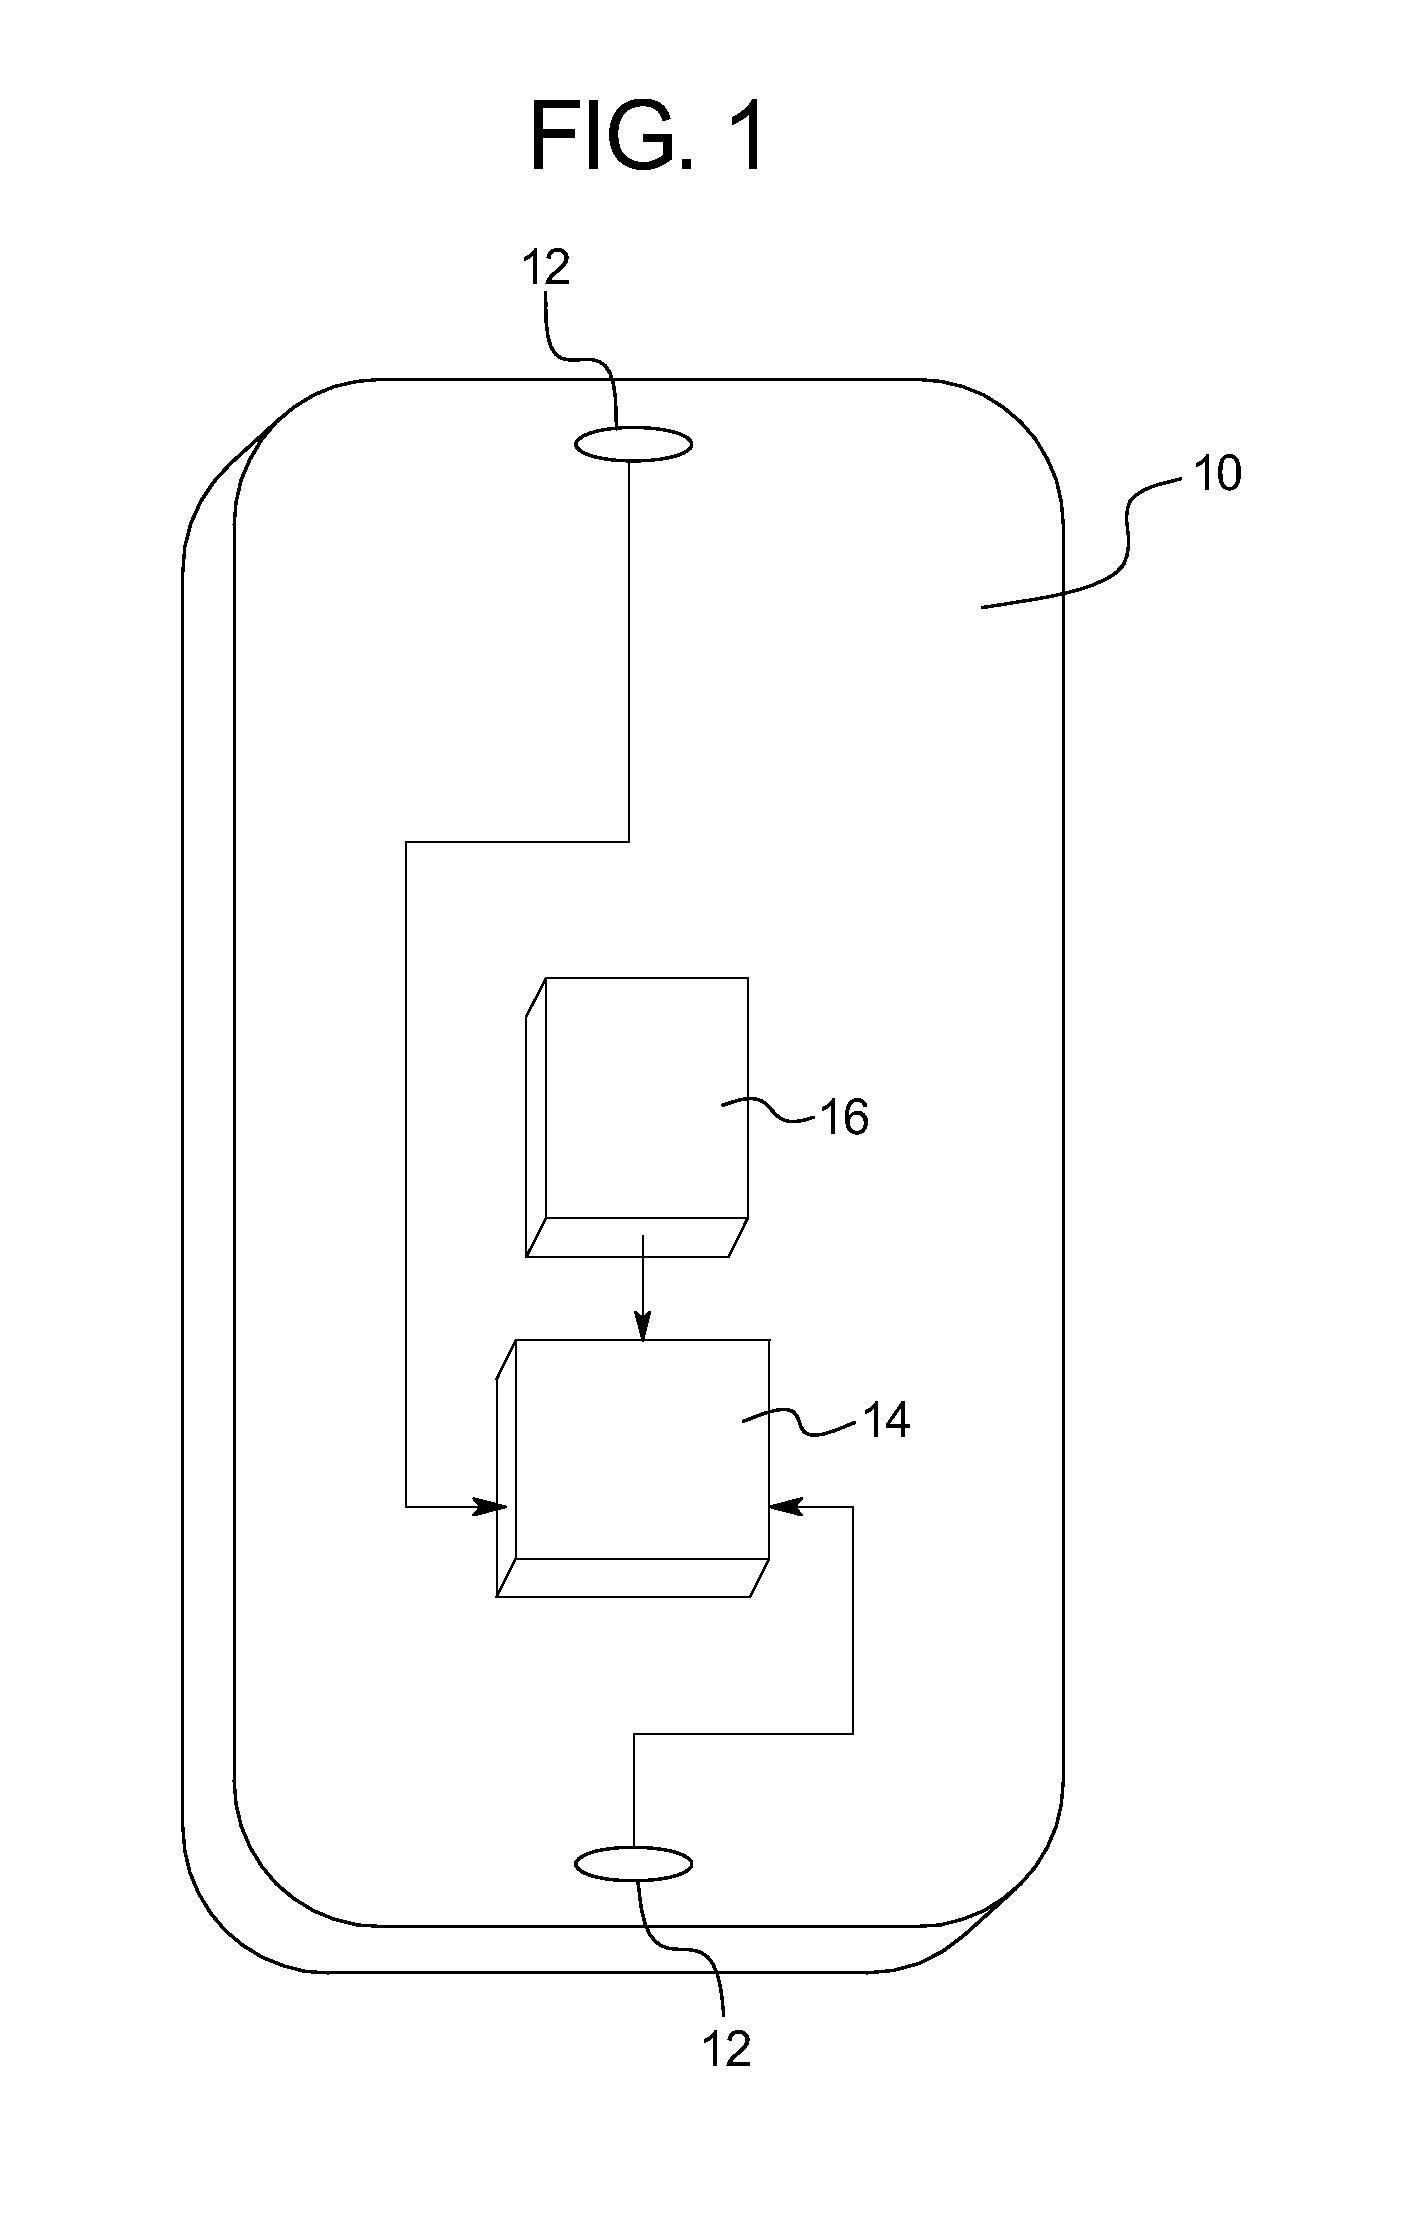 Noise reduction using microphone array orientation information